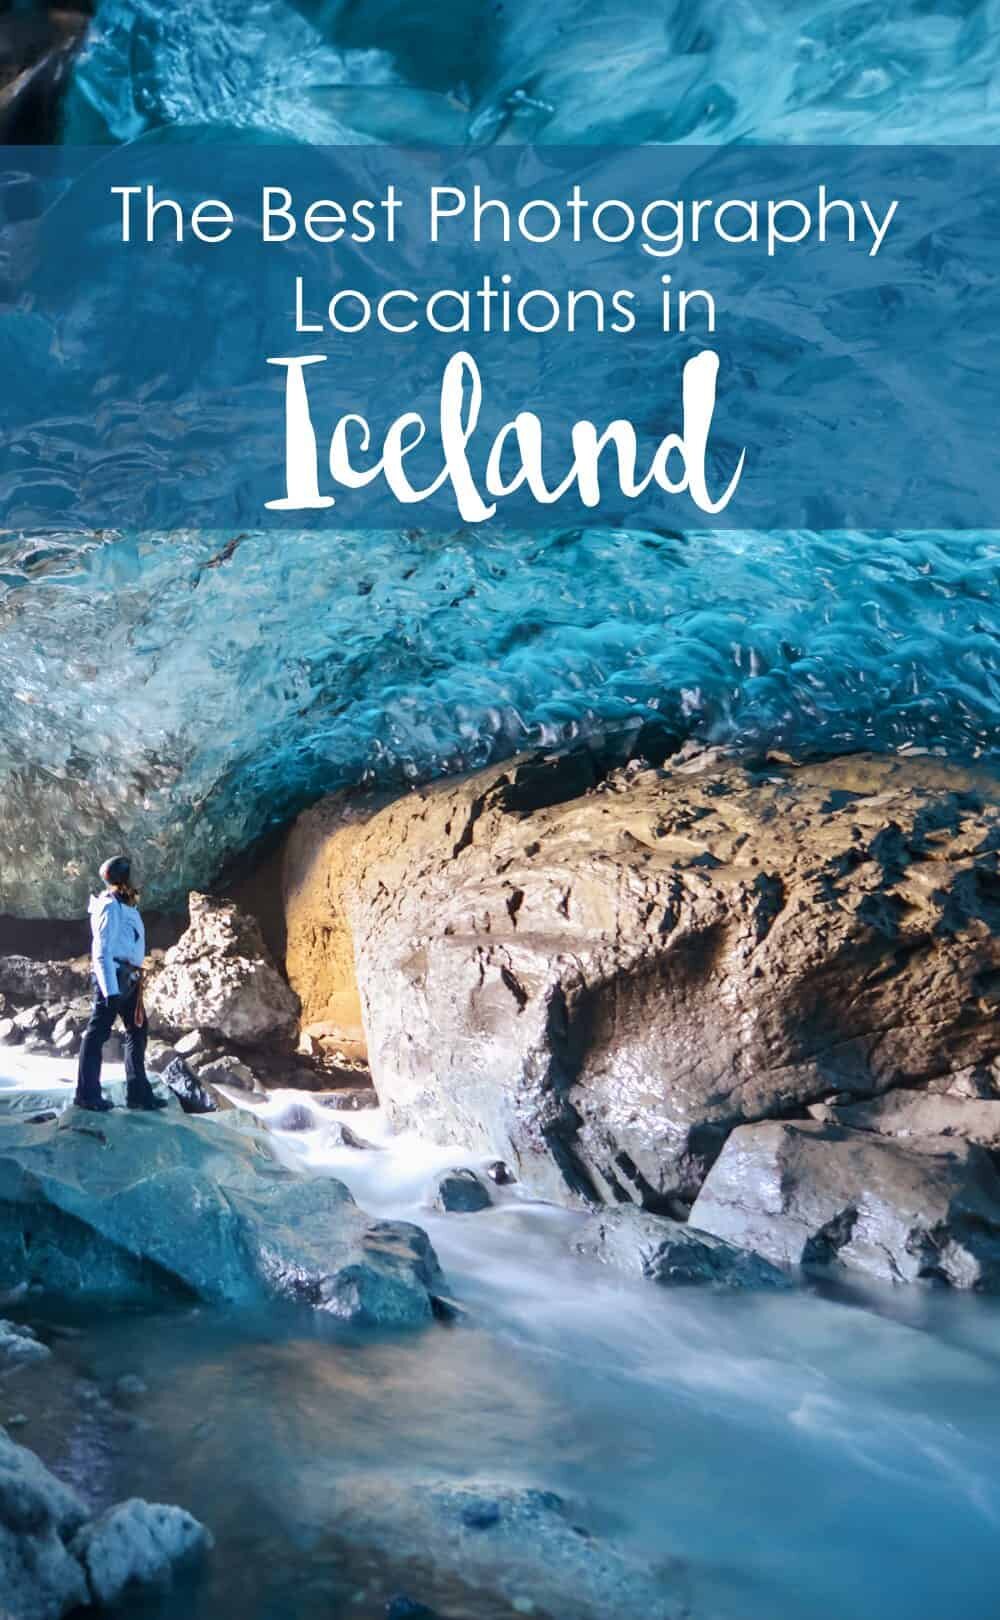 The Best Photography Locations in Iceland - South Coast by The Wandering Lens